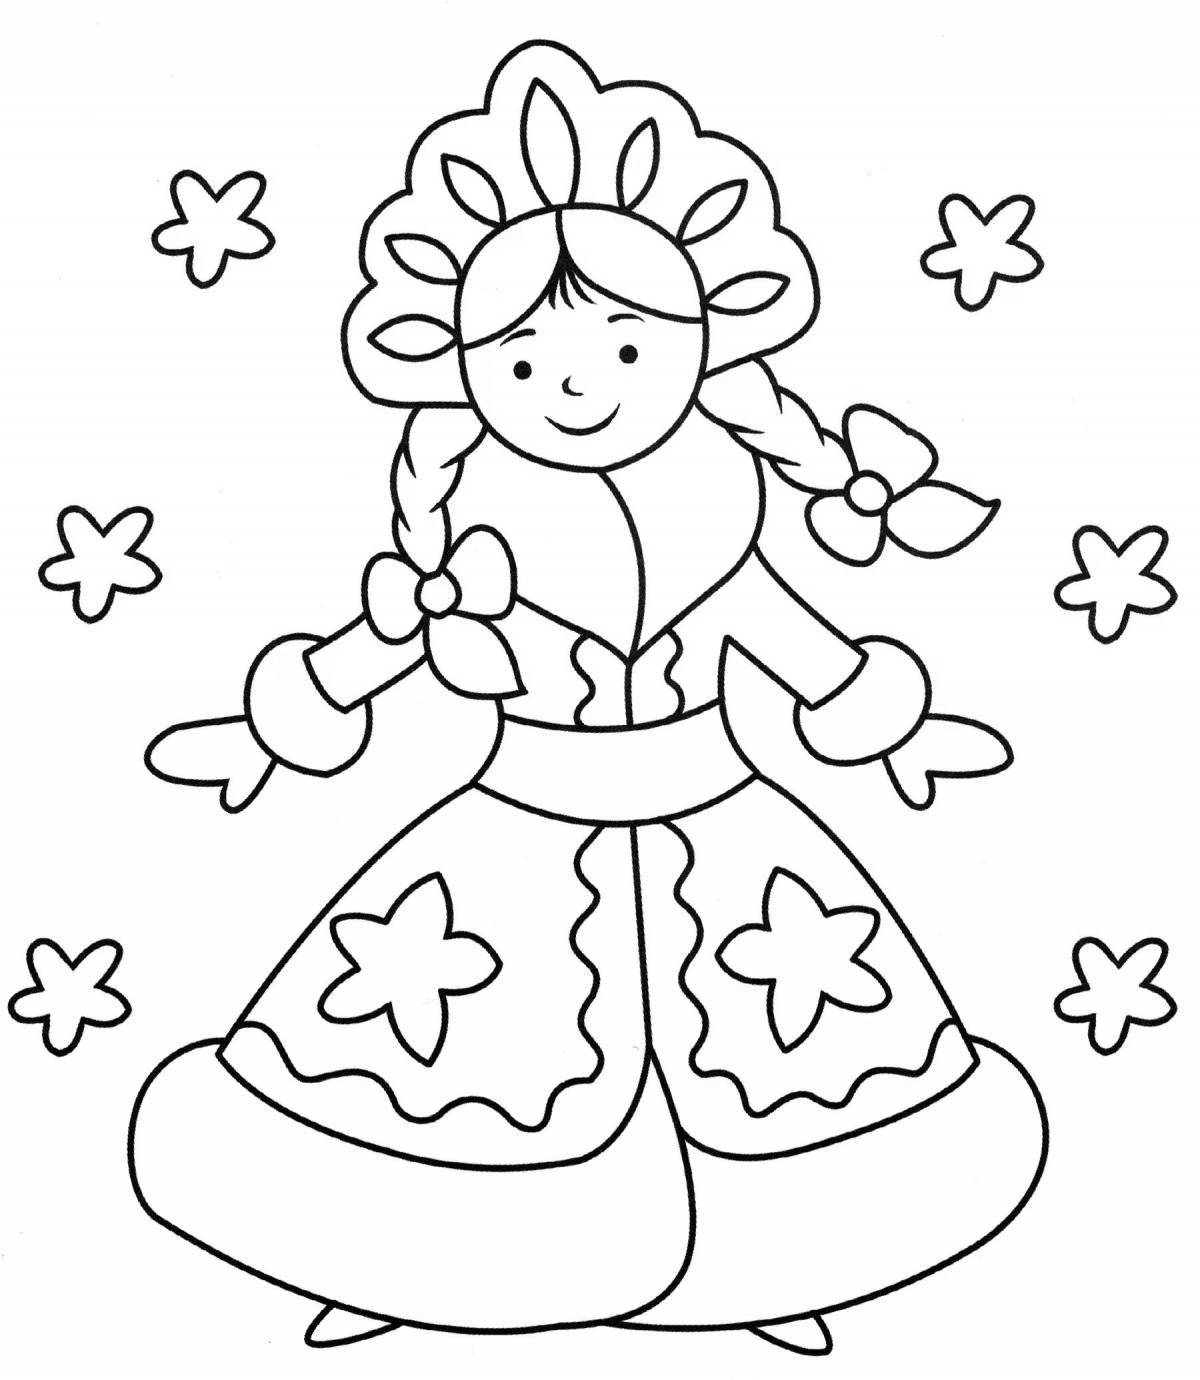 Sweet Christmas Snow Maiden coloring book